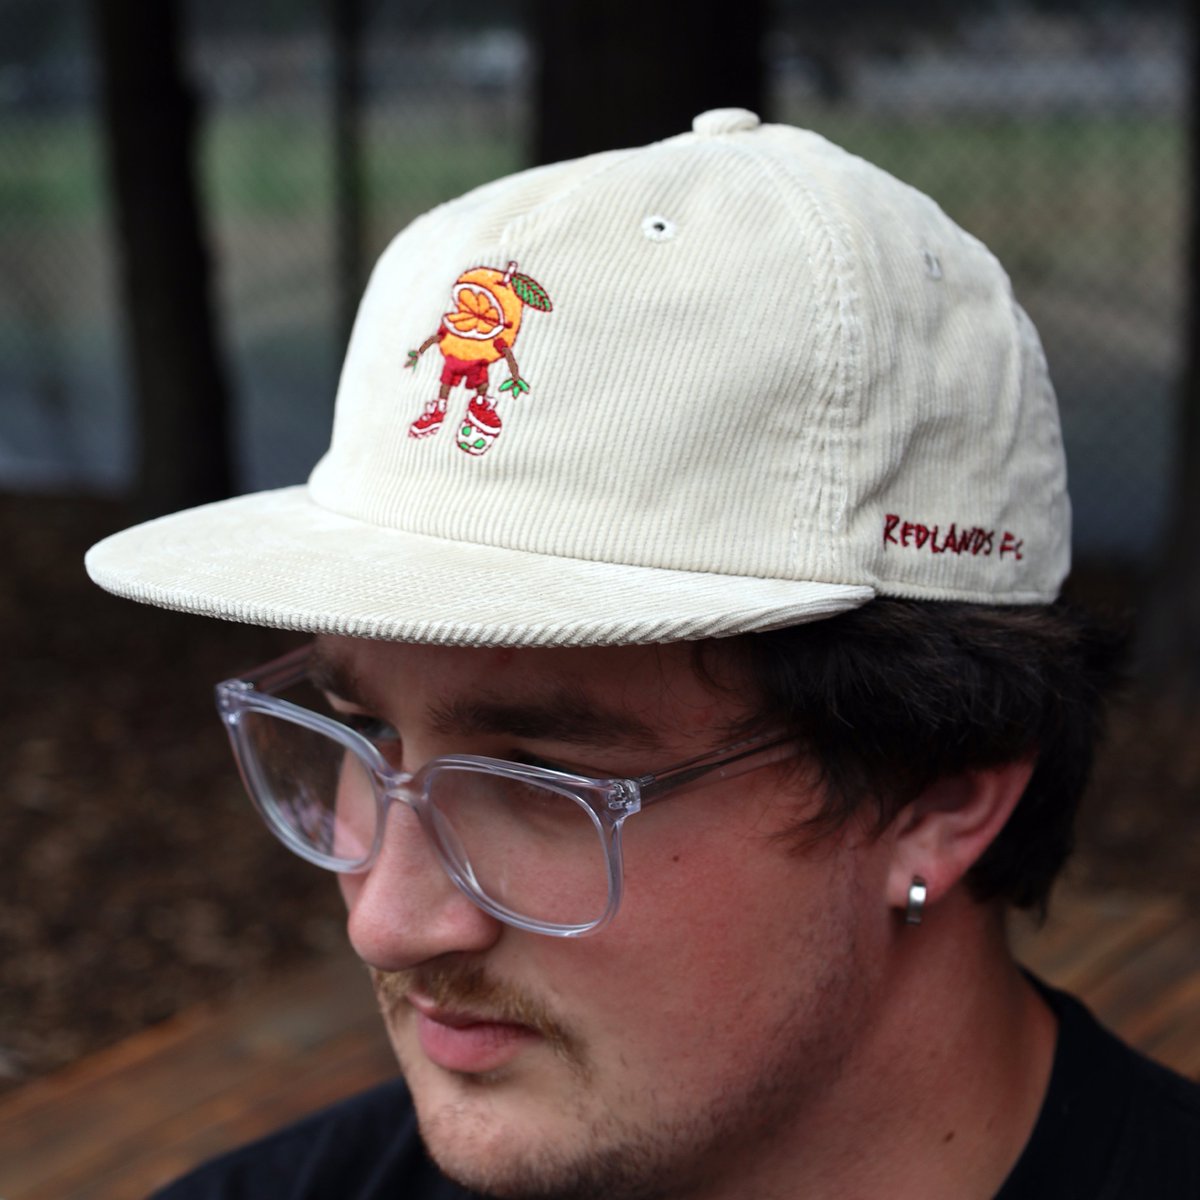 this benji navel character incorporates redland’s orange in a fun new way for football. designed by creative director and artist, geoff gouveia, this cap is stitched to perfection on off-white corduroy.

only 100 made! visit [ https://t.co/ol5LPeMeMJ ] for a chance to purchase… https://t.co/W79Ktm59B1 https://t.co/fWUkL9w015